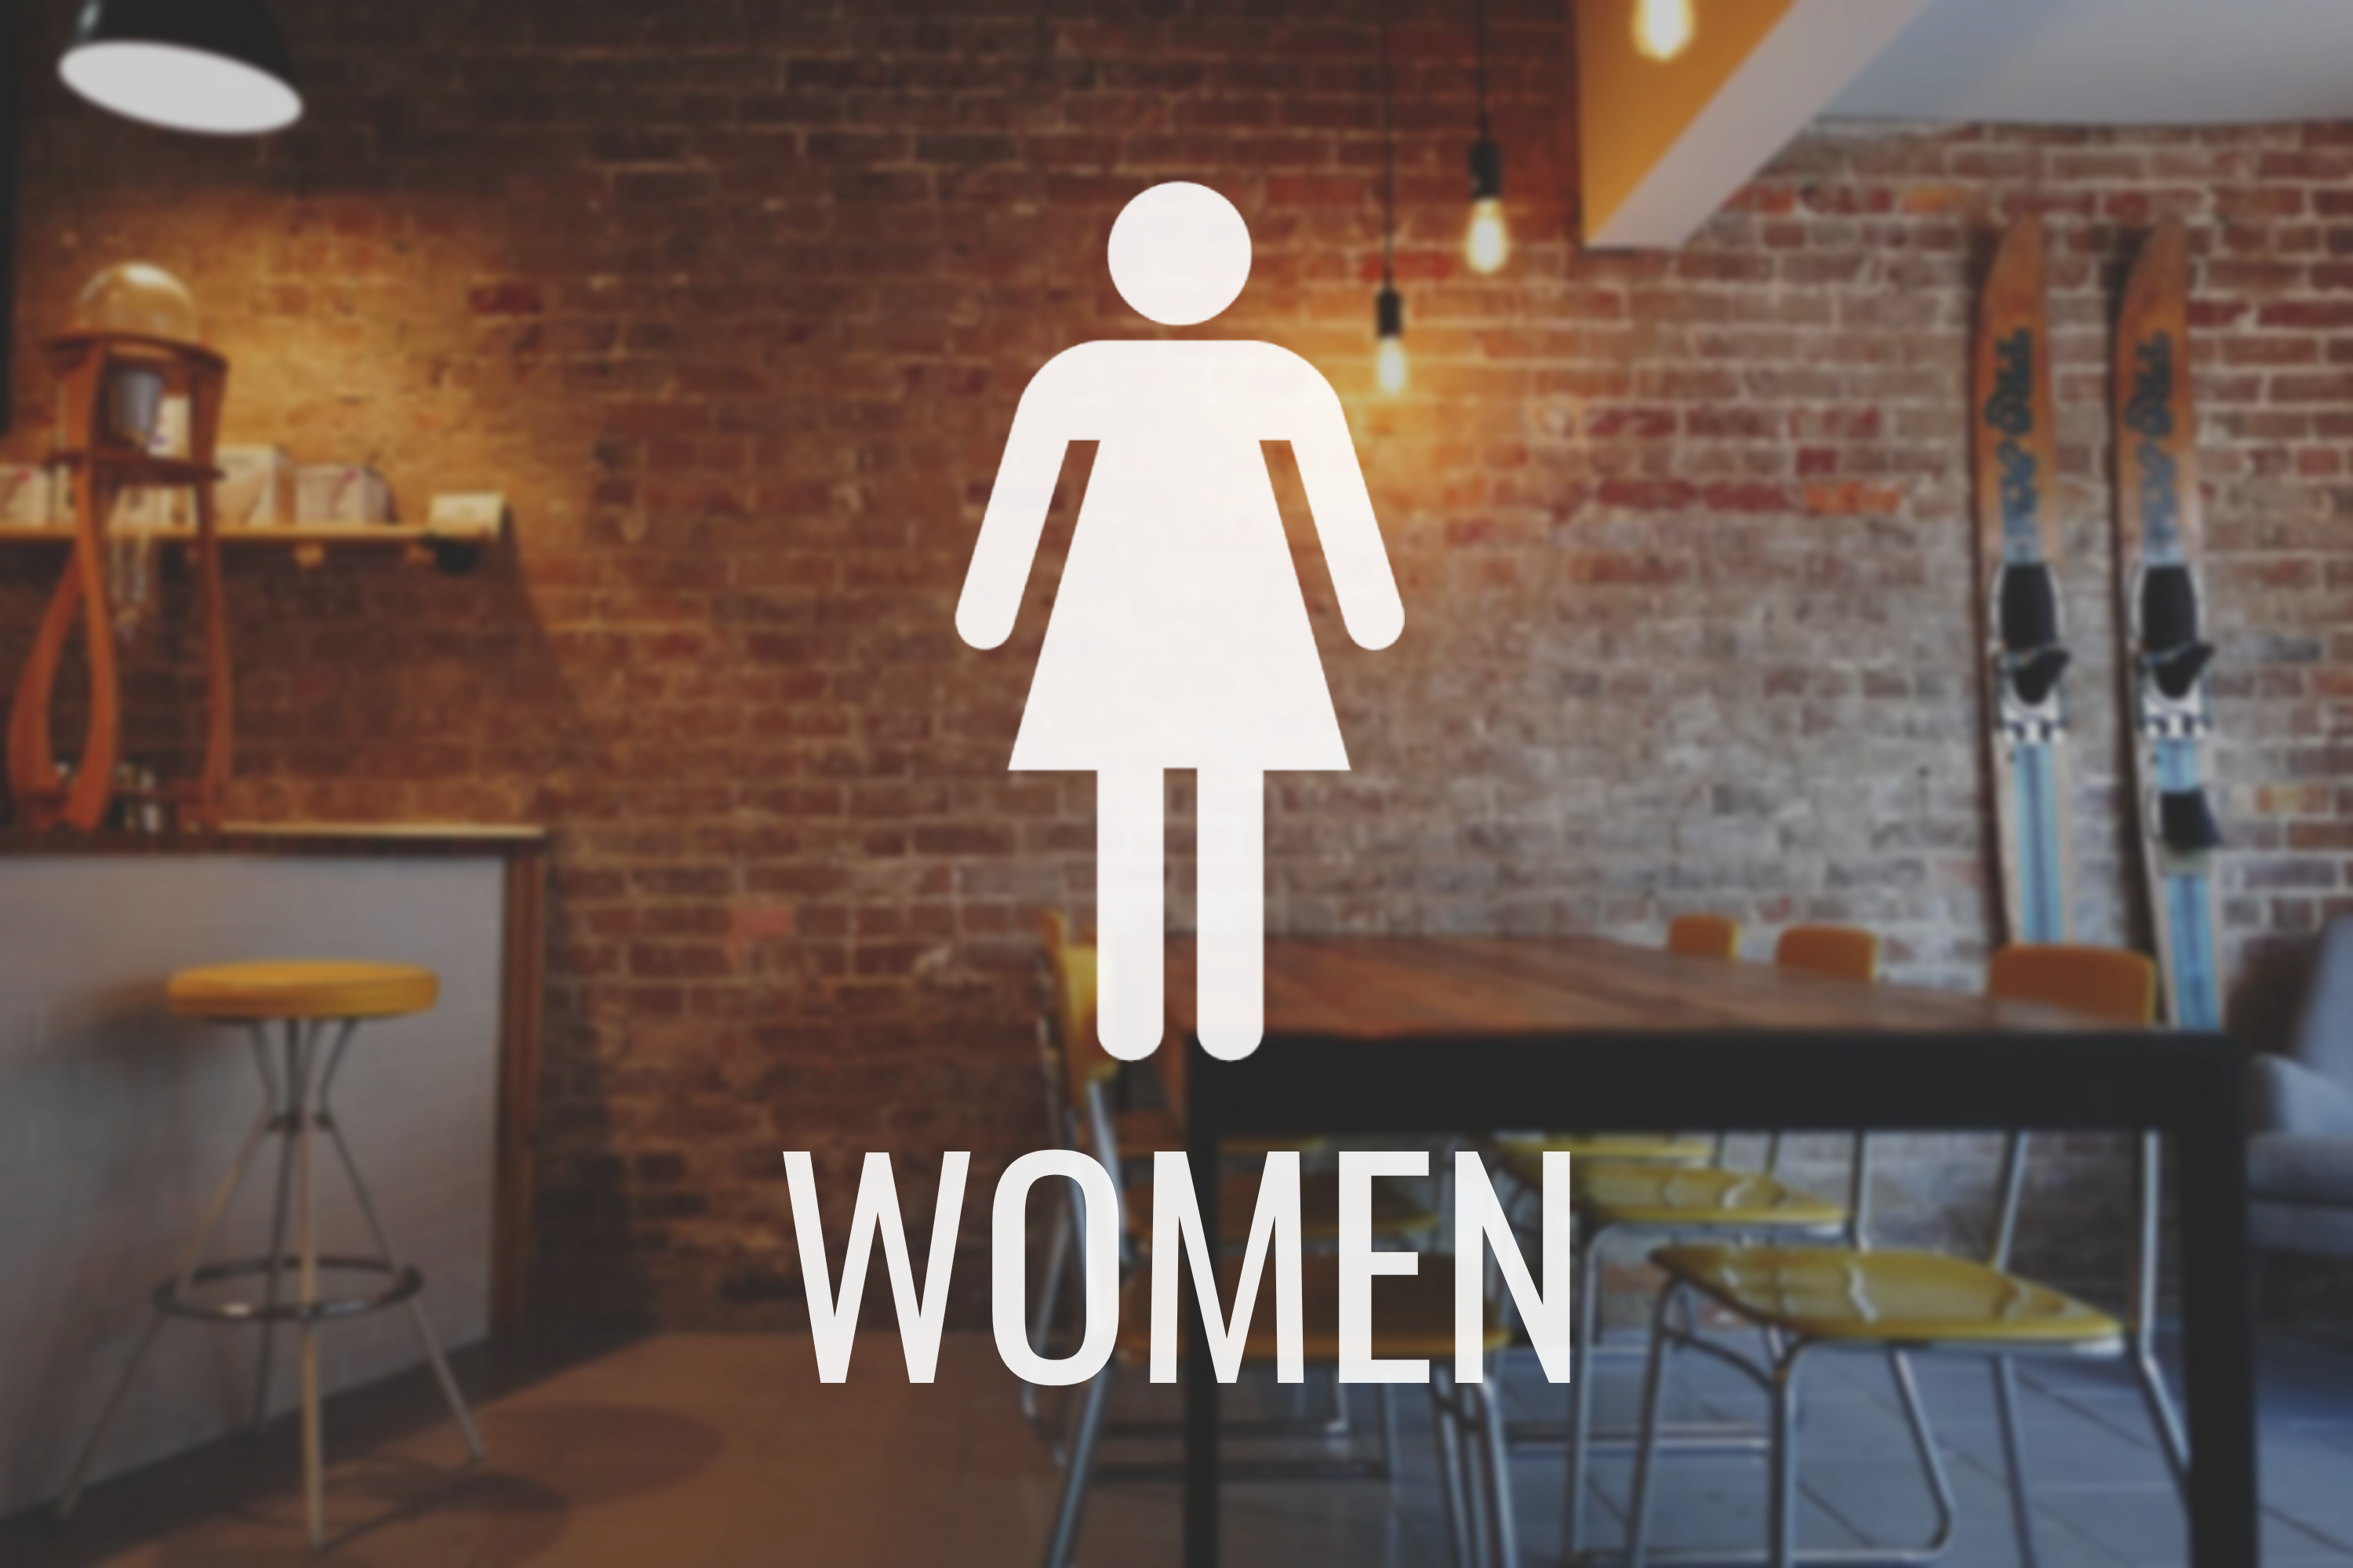 Women Restroom Decal with Symbol - Vinyl Sticker for Businesses, Stores, Bars, Coffee Shops, Eatery, Cafeteria, Food Truck!